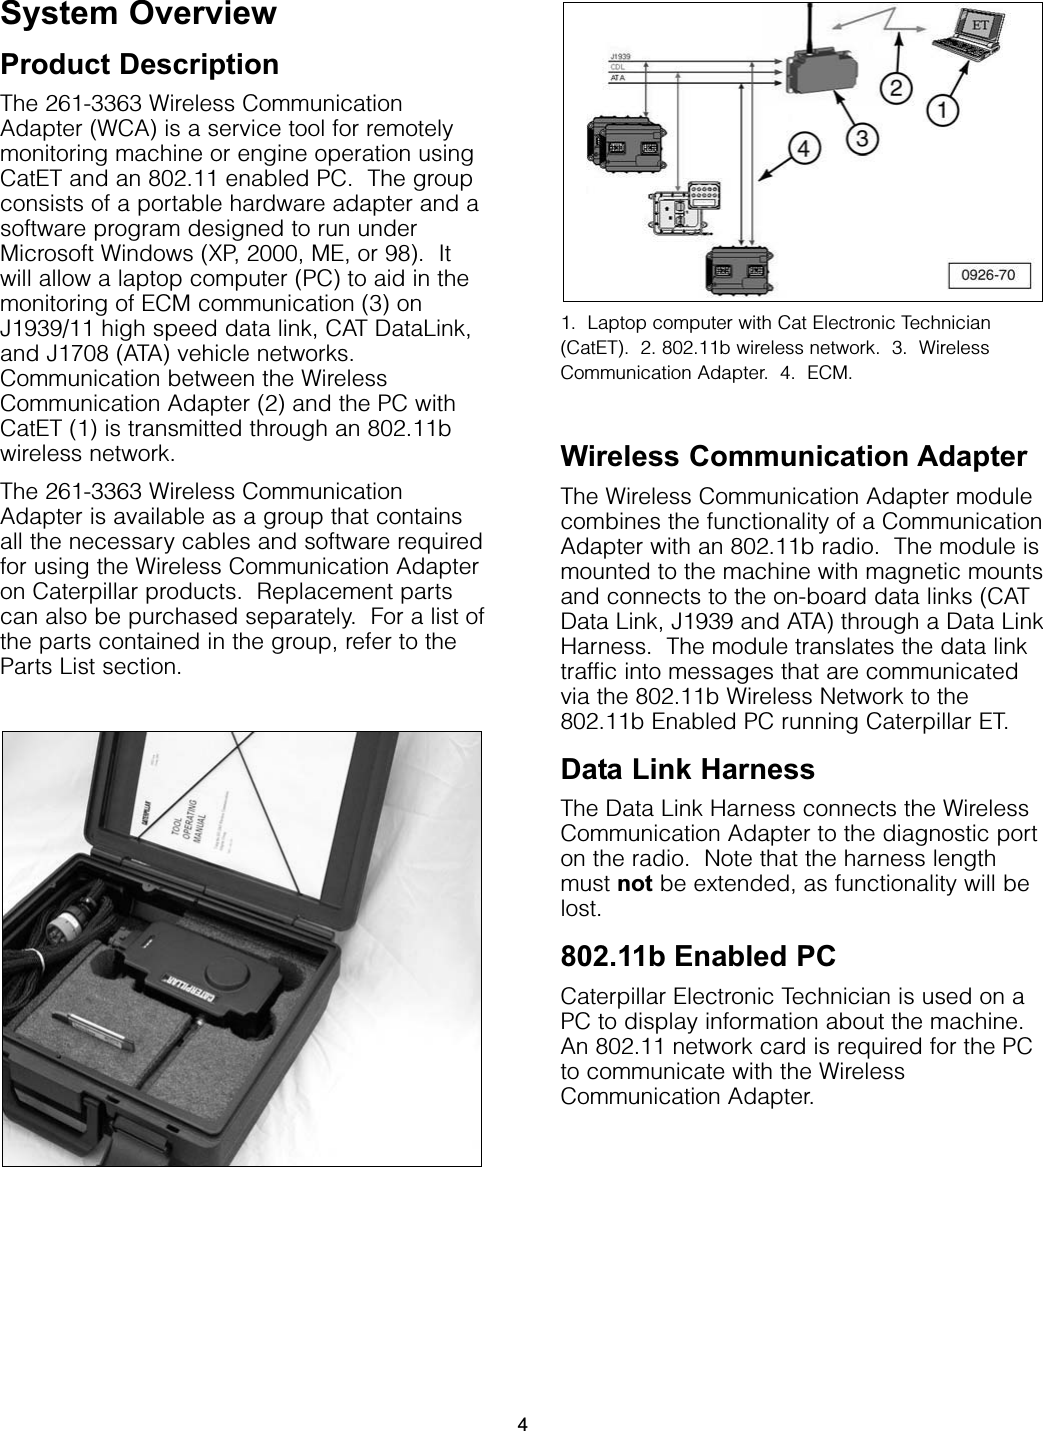 System OverviewProduct DescriptionThe 261-3363 Wireless CommunicationAdapter (WCA) is a service tool for remotelymonitoring machine or engine operation usingCatET and an 802.11 enabled PC.  The groupconsists of a portable hardware adapter and asoftware program designed to run underMicrosoft Windows (XP, 2000, ME, or 98).  Itwill allow a laptop computer (PC) to aid in themonitoring of ECM communication (3) onJ1939/11 high speed data link, CAT DataLink,and J1708 (ATA) vehicle networks.Communication between the WirelessCommunication Adapter (2) and the PC withCatET (1) is transmitted through an 802.11bwireless network.The 261-3363 Wireless CommunicationAdapter is available as a group that containsall the necessary cables and software requiredfor using the Wireless Communication Adapteron Caterpillar products.  Replacement partscan also be purchased separately.  For a list ofthe parts contained in the group, refer to theParts List section.1.  Laptop computer with Cat Electronic Technician(CatET).  2. 802.11b wireless network.  3.  WirelessCommunication Adapter.  4.  ECM.Wireless Communication AdapterThe Wireless Communication Adapter modulecombines the functionality of a CommunicationAdapter with an 802.11b radio.  The module ismounted to the machine with magnetic mountsand connects to the on-board data links (CATData Link, J1939 and ATA) through a Data LinkHarness.  The module translates the data linktraffic into messages that are communicatedvia the 802.11b Wireless Network to the802.11b Enabled PC running Caterpillar ET.Data Link HarnessThe Data Link Harness connects the WirelessCommunication Adapter to the diagnostic porton the radio.  Note that the harness lengthmust not be extended, as functionality will belost.802.11b Enabled PCCaterpillar Electronic Technician is used on aPC to display information about the machine.An 802.11 network card is required for the PCto communicate with the WirelessCommunication Adapter.4